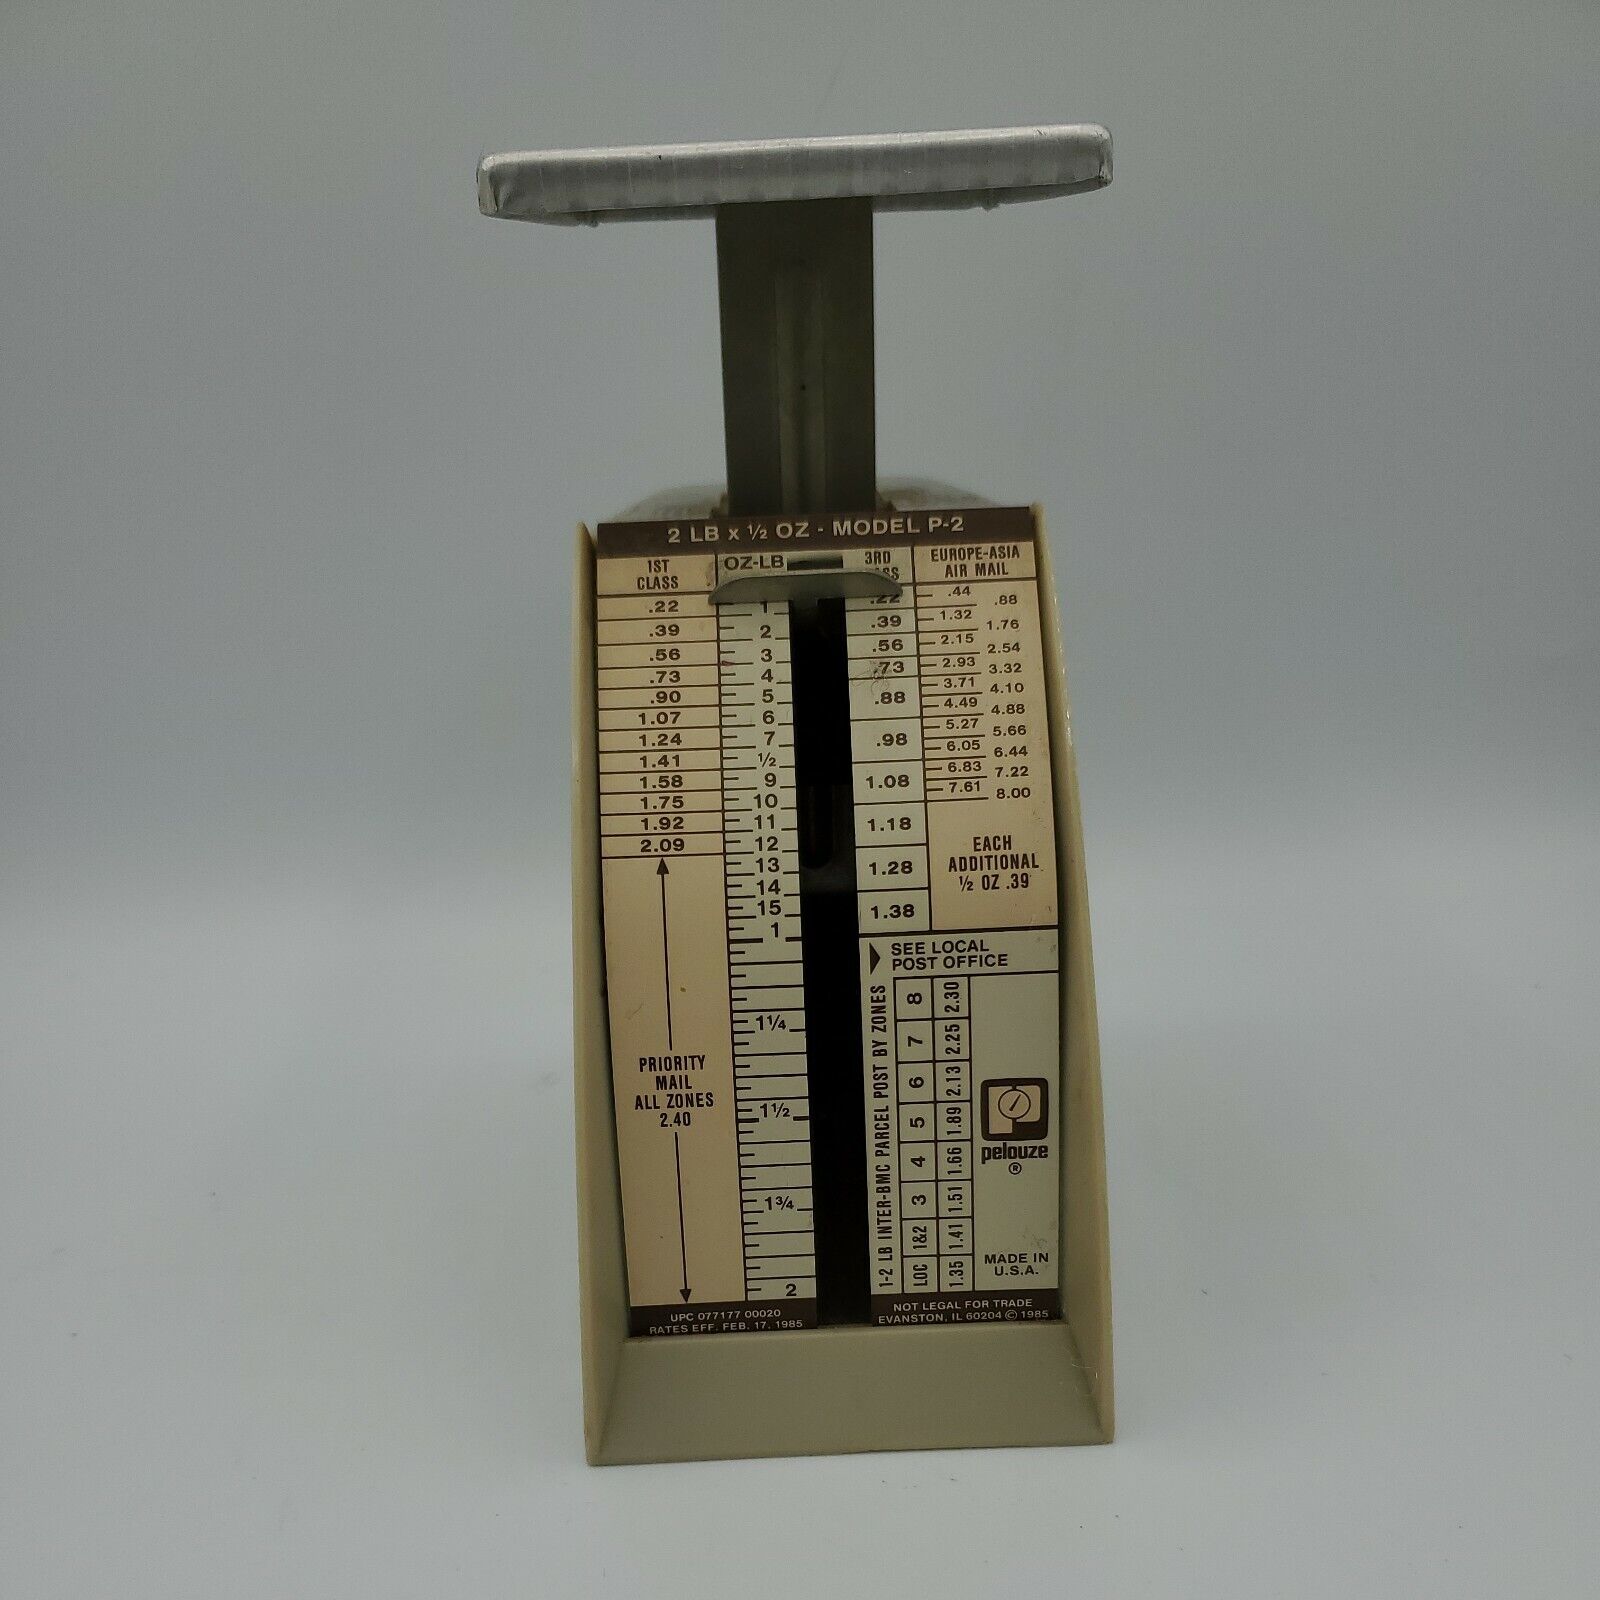 VTG 1985 Pelouze Parcel 2lbs. Scale Model P-2 Dated Mail Scale Weigh